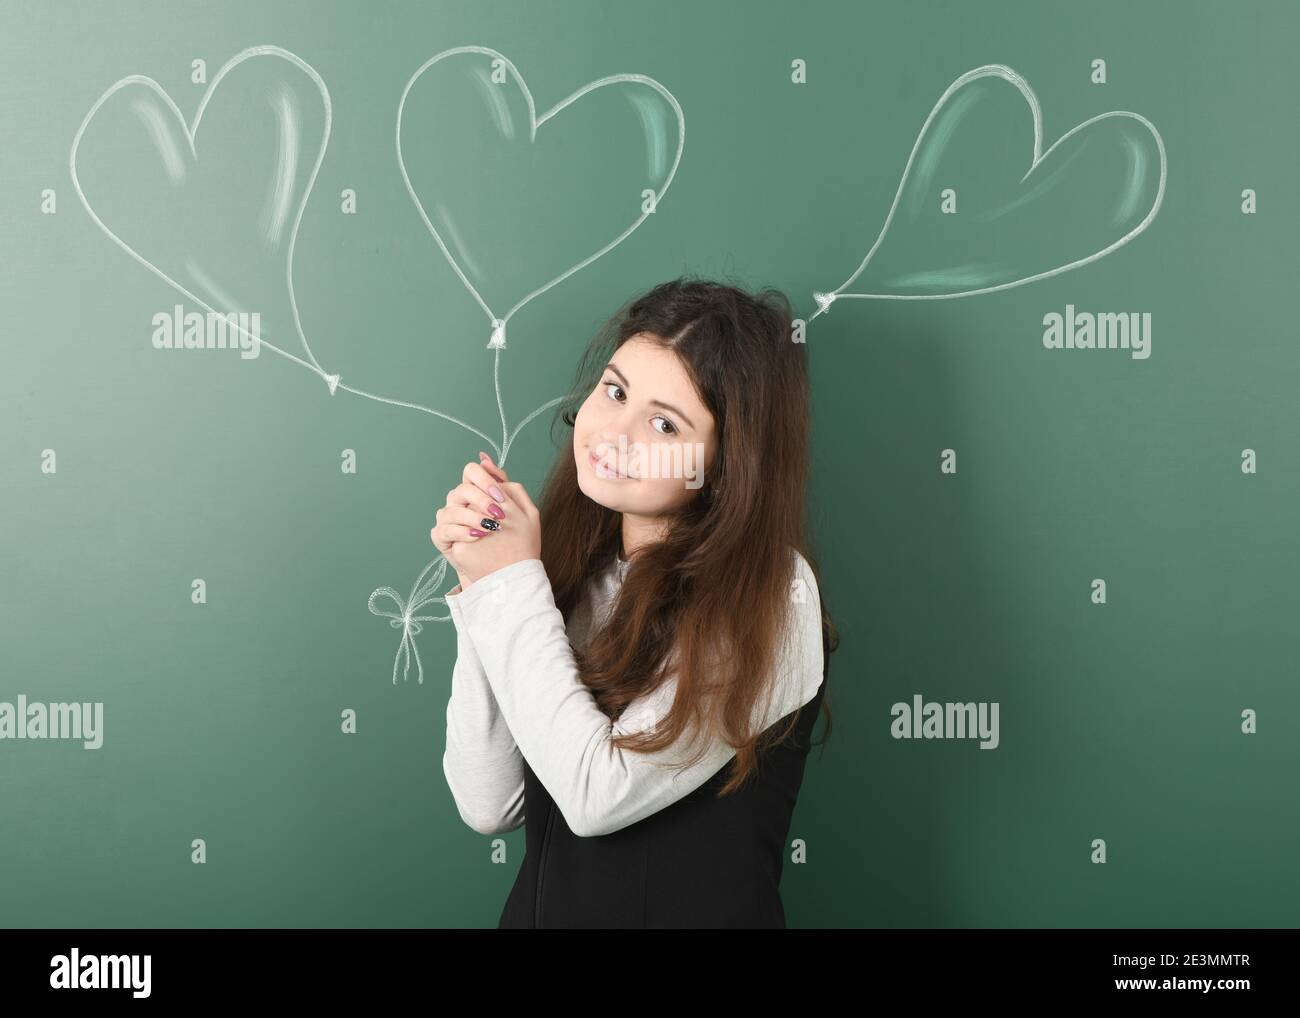 Pre-adolescent child holding three painted balloons on a green background. Balloons are heart-shaped. Stock Photo